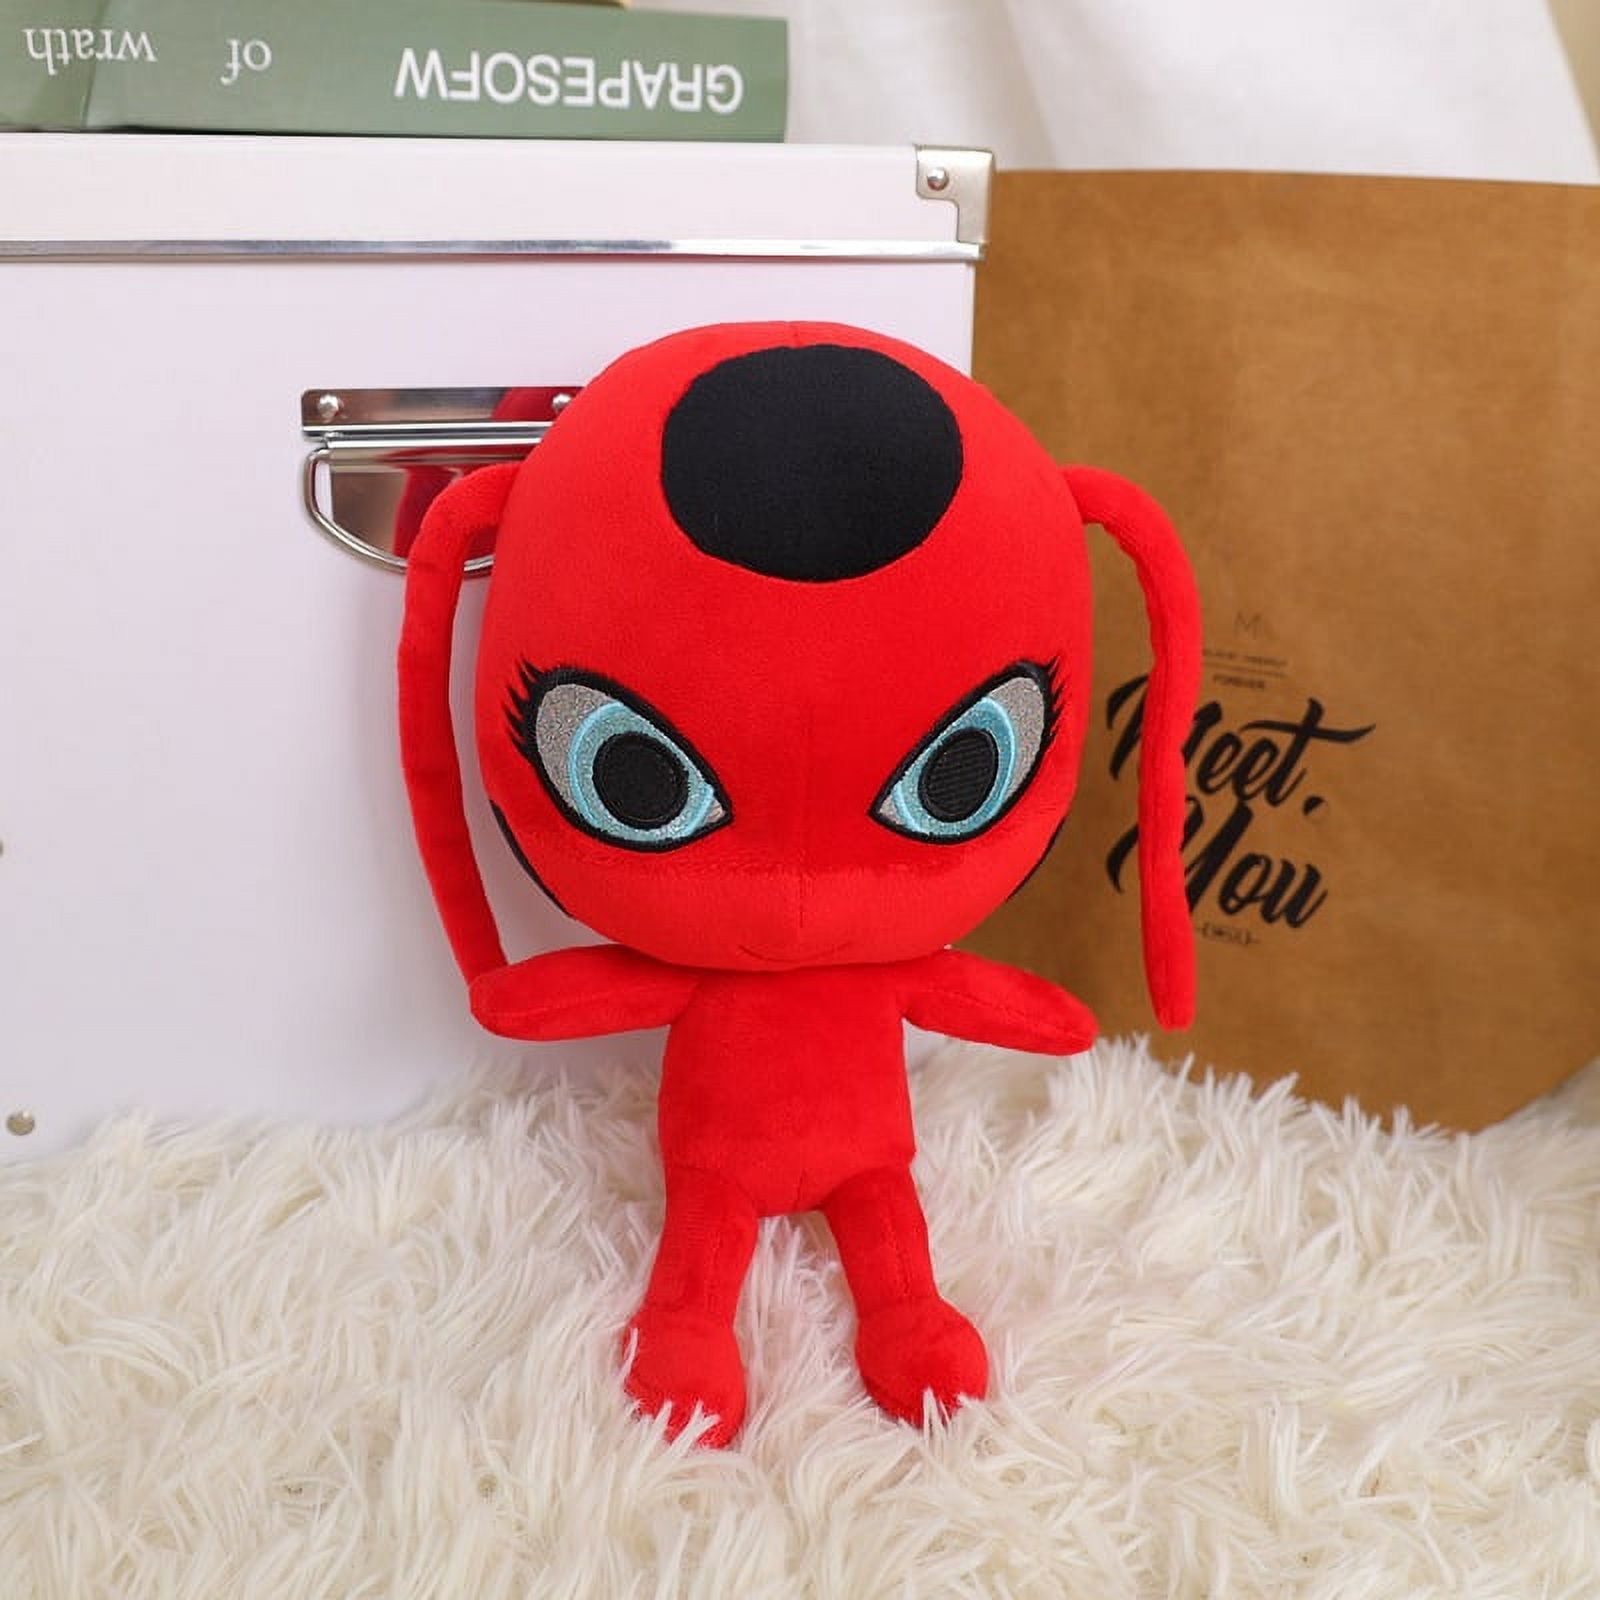 Miraculous Ladybug - Kwami Mon Ami Tikki, 9-inch Ladybug Plush Toys for  Kids, Super Soft Stuffed Toy with Resin Eyes, High Glitter and Gloss, and